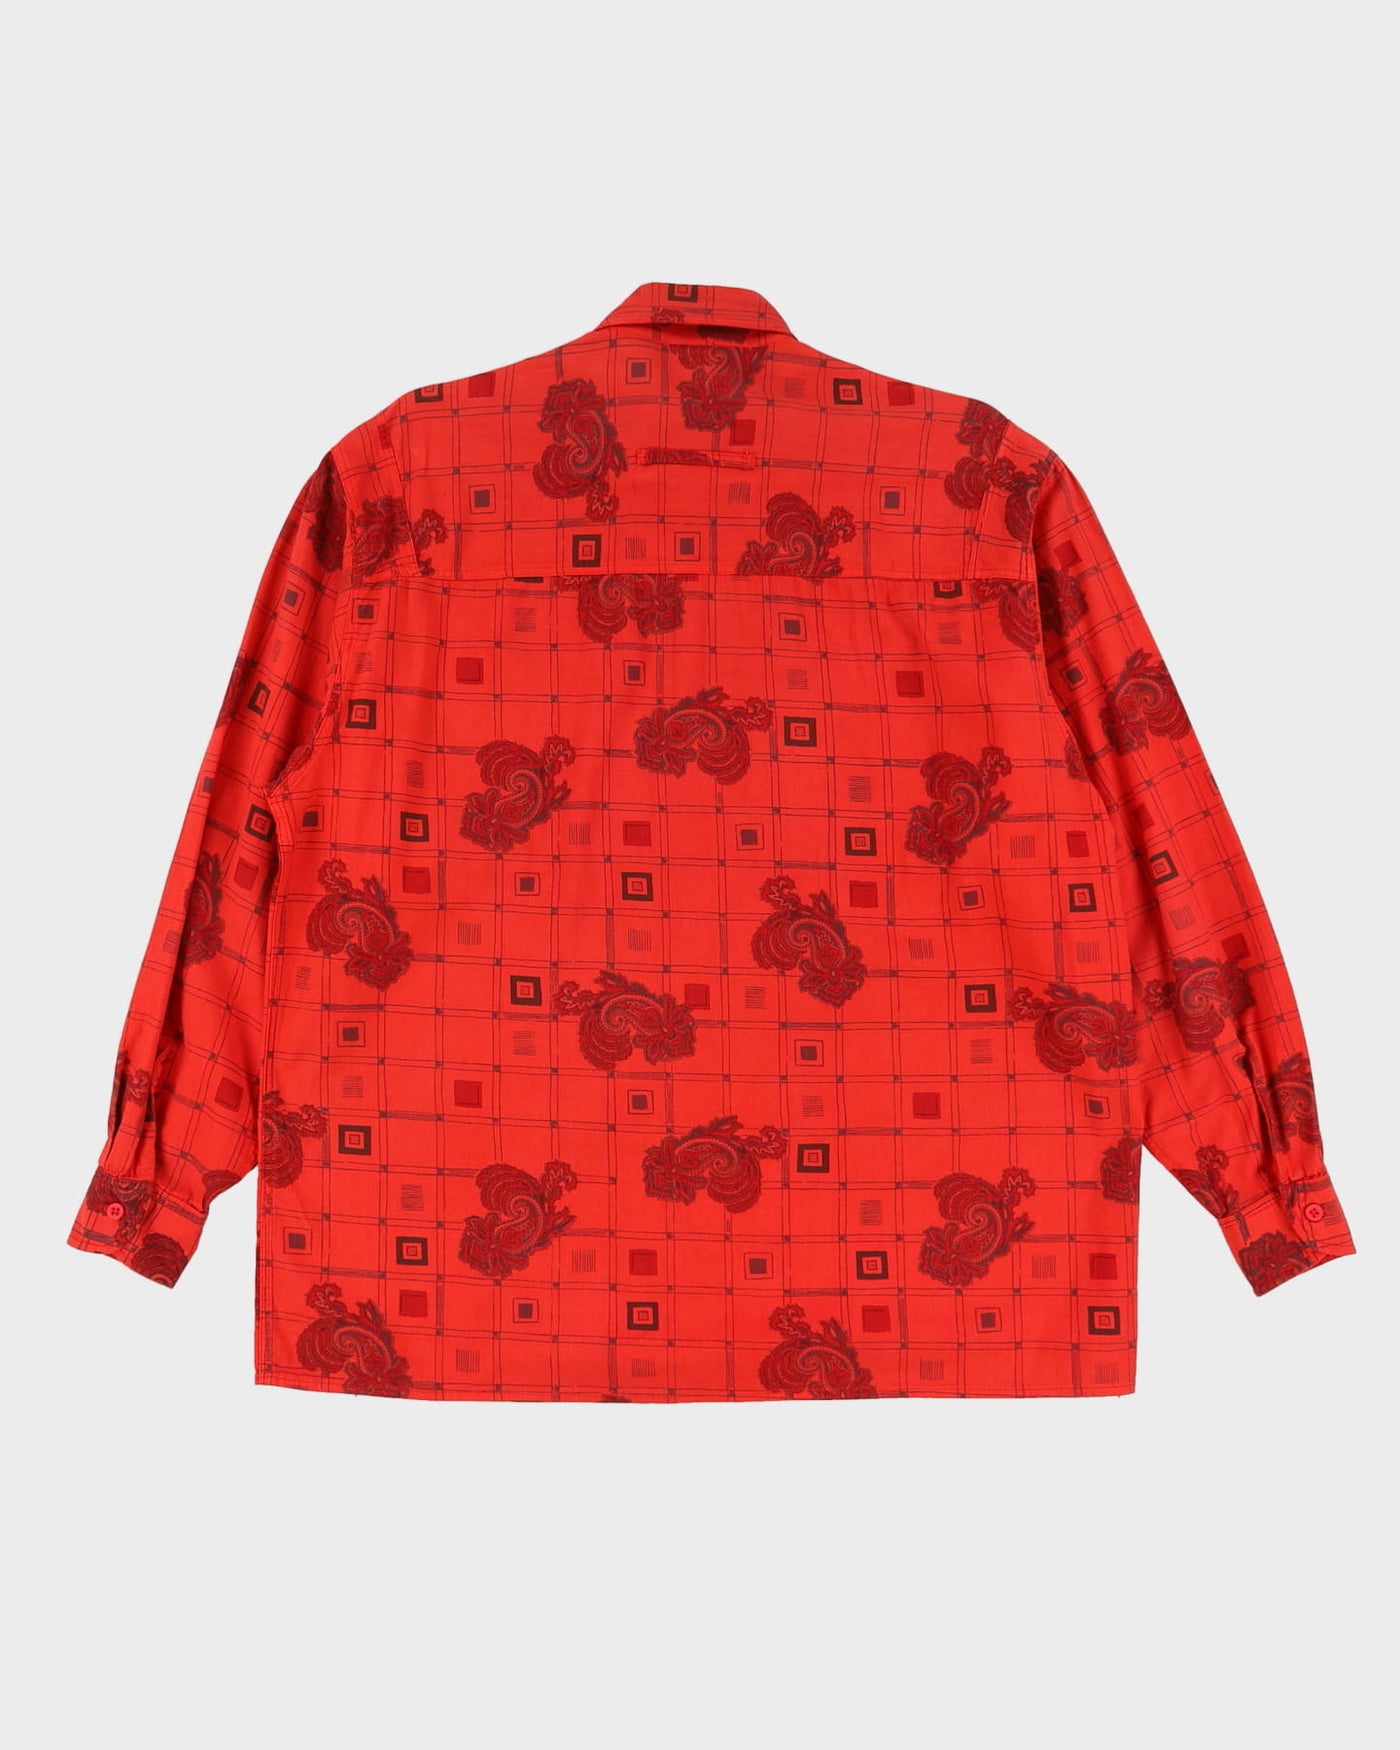 Guess 1990s Red And Black Patterned Shirt - L